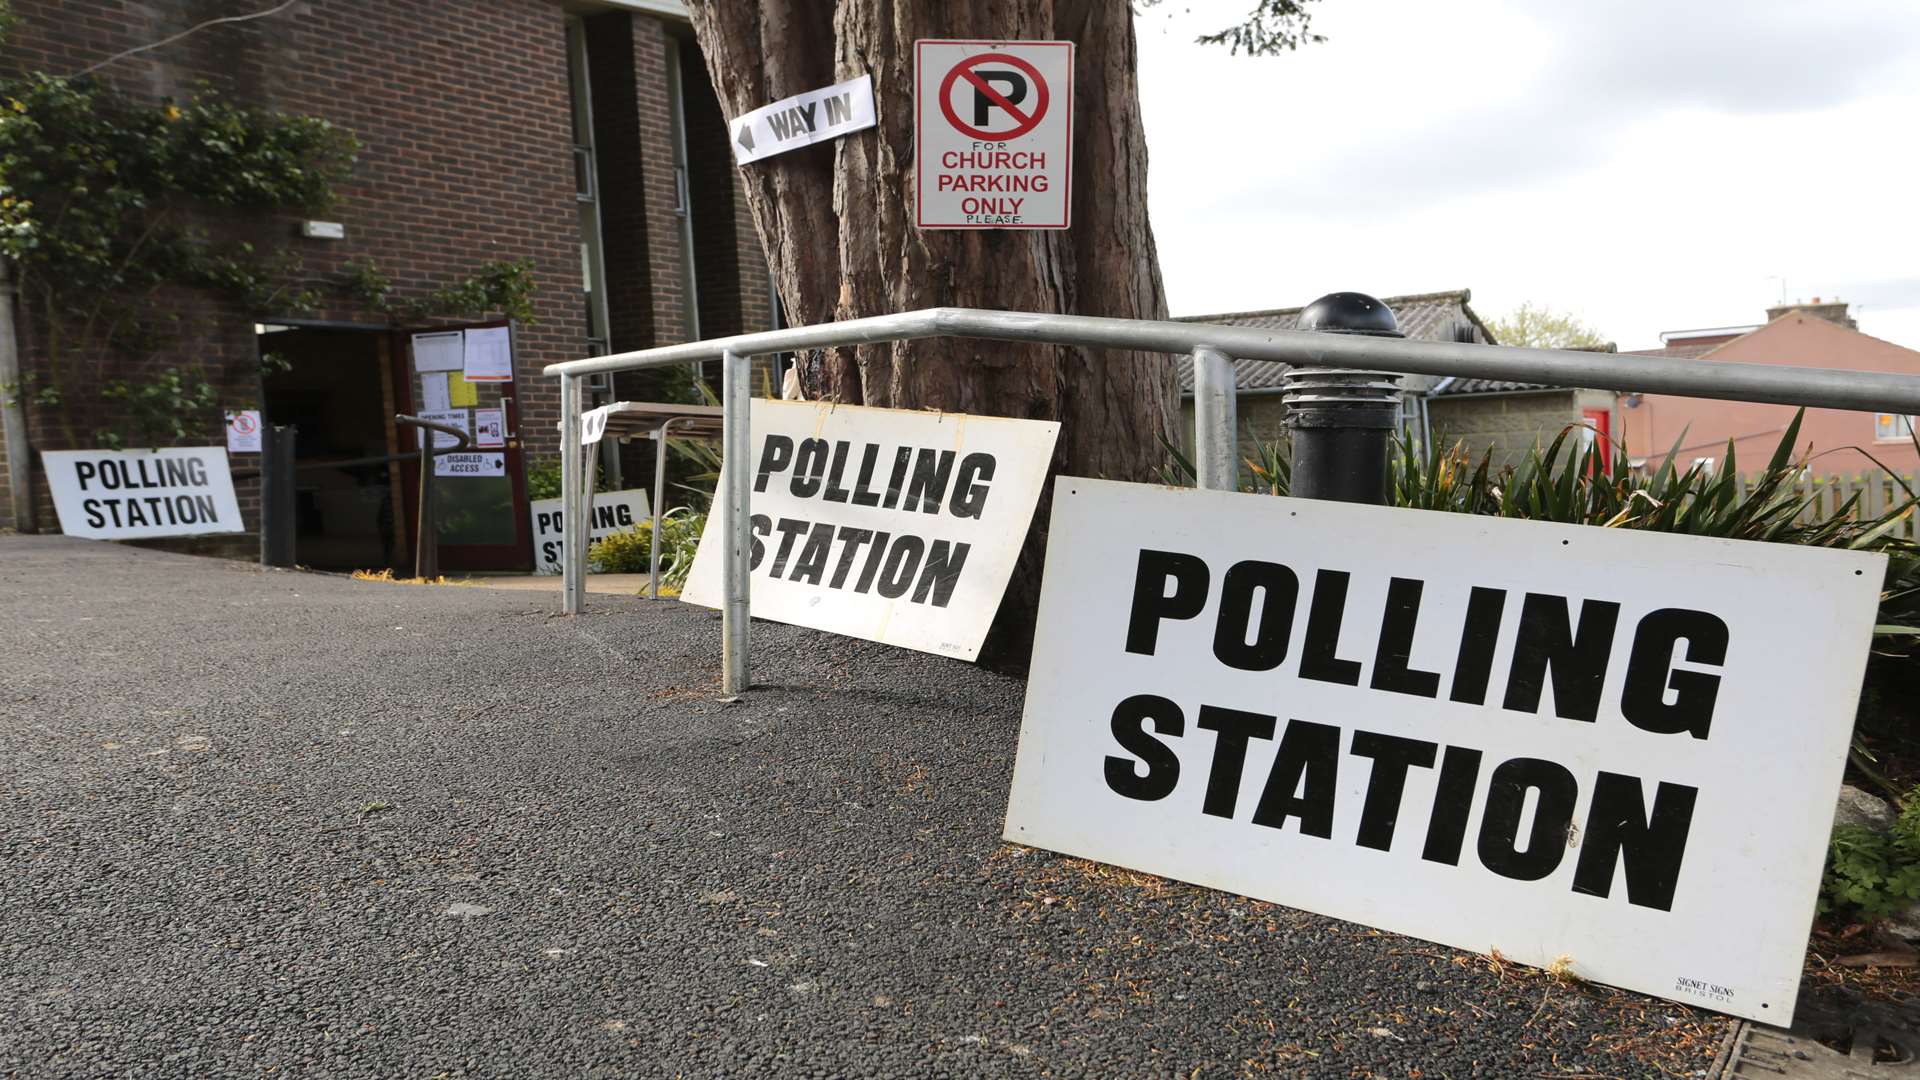 A polling station in Maidstone